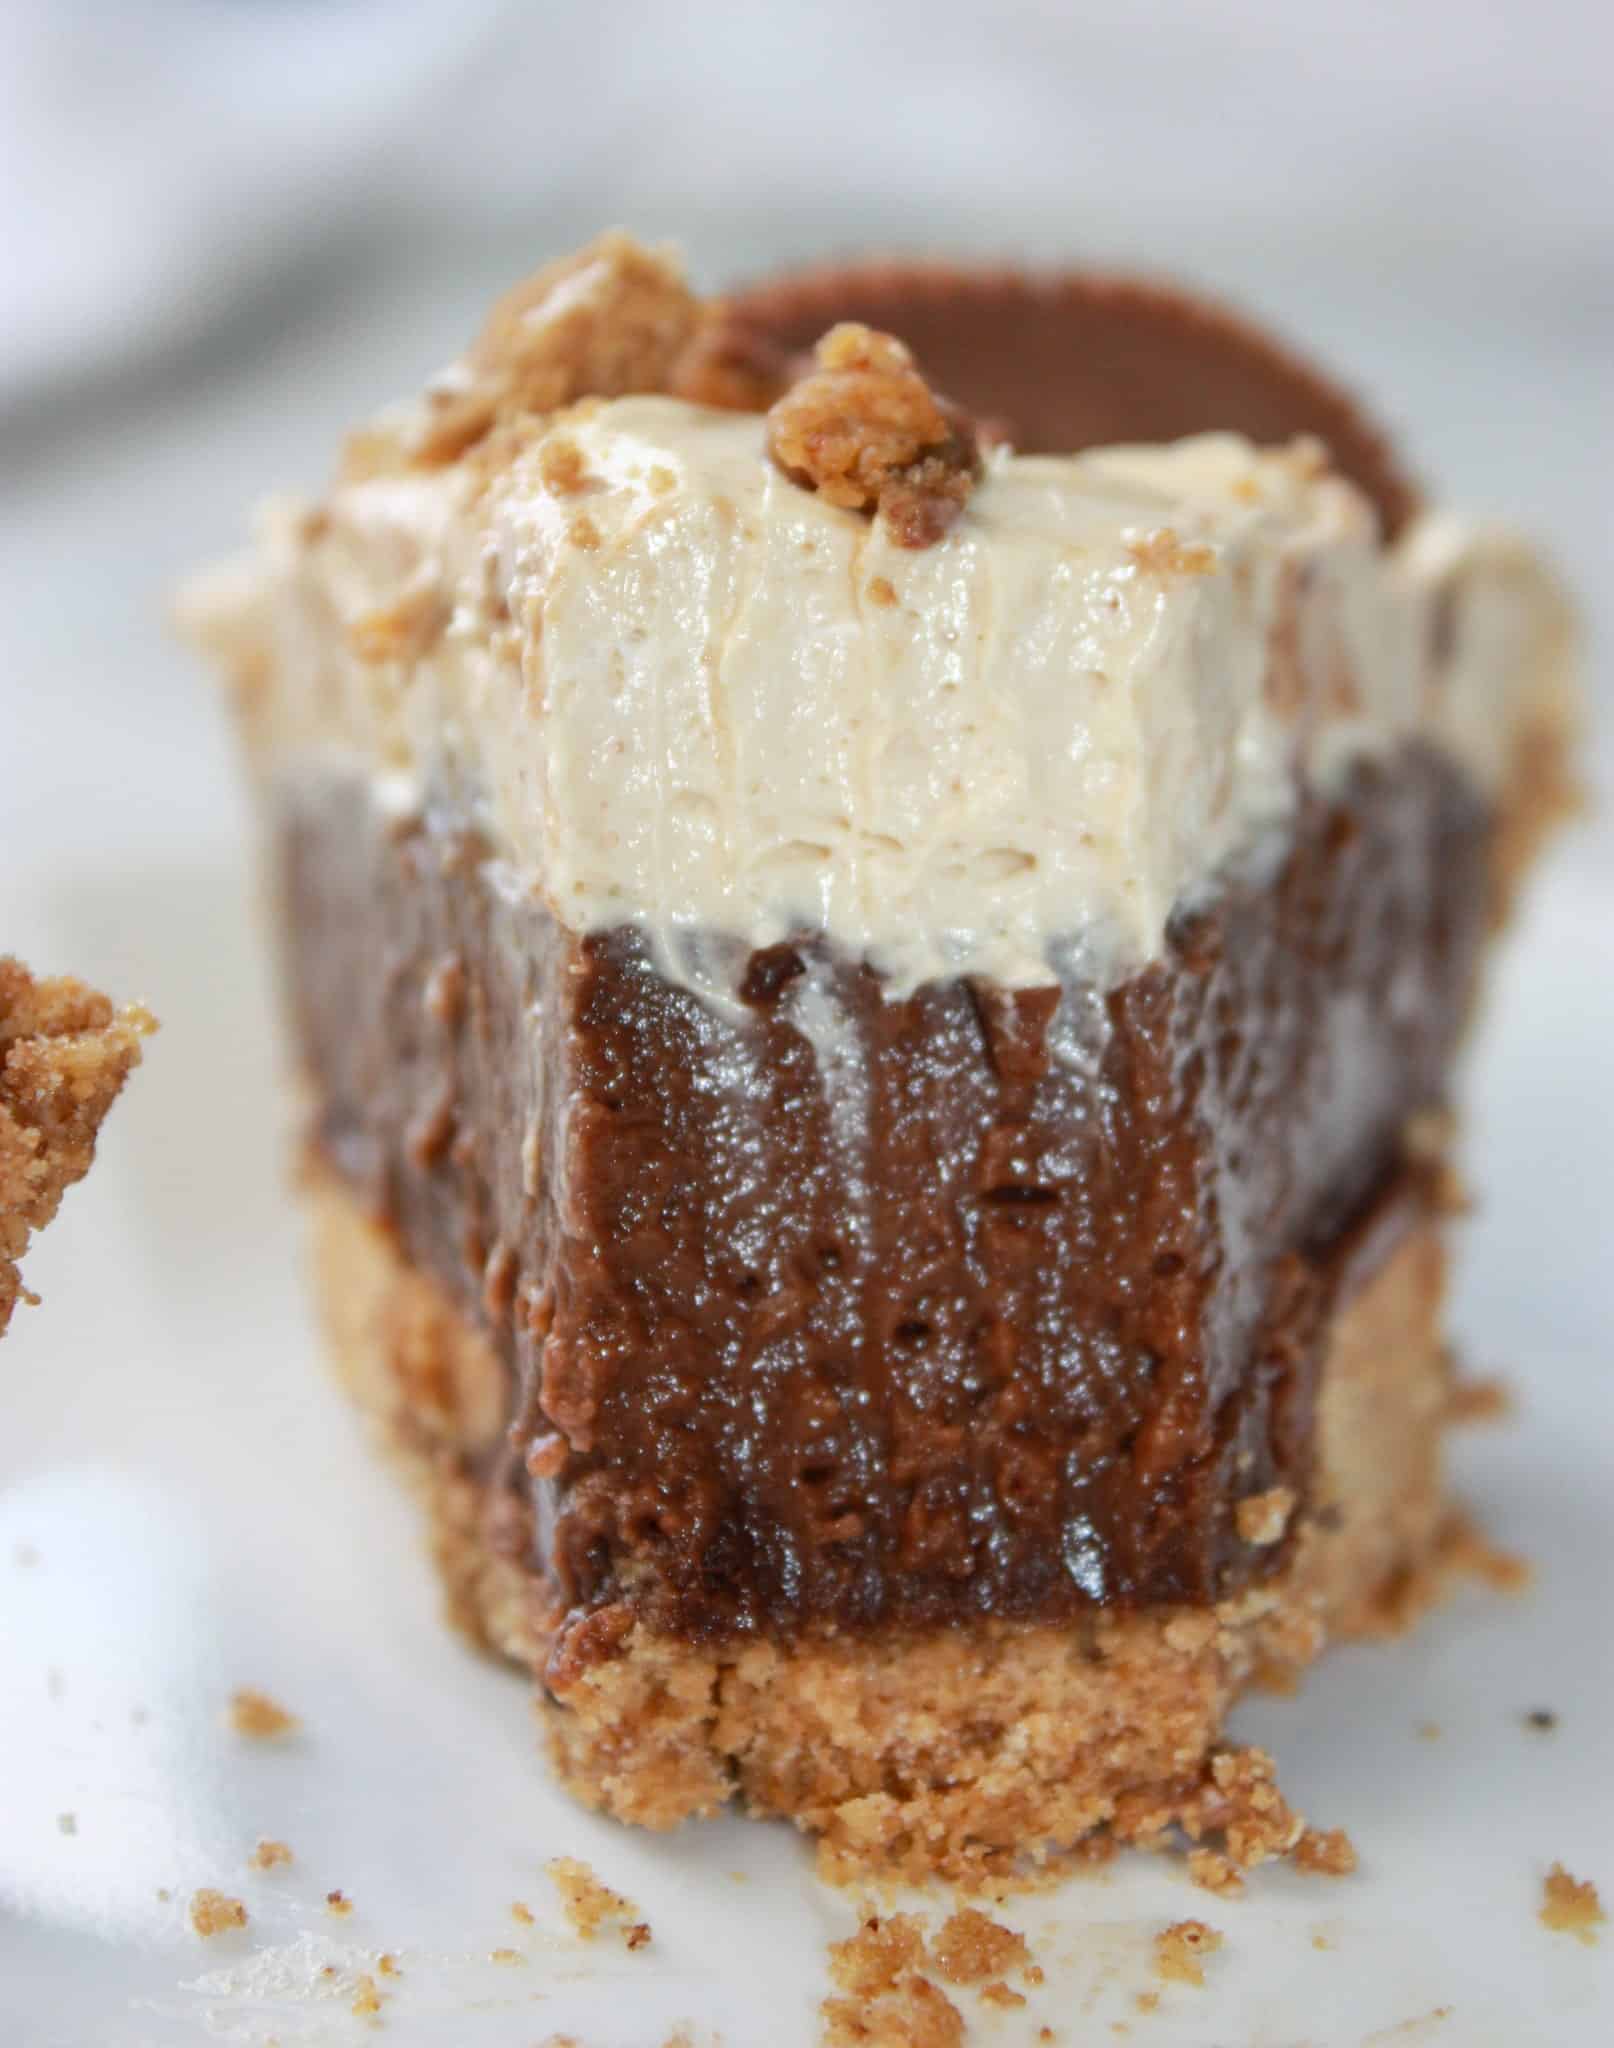 Peanut Butter Cup Pie is an easy dessert recipe that highlights my favourite flavour combination!  The popular mixture of chocolate and peanut butter is popular with both young and old alike.